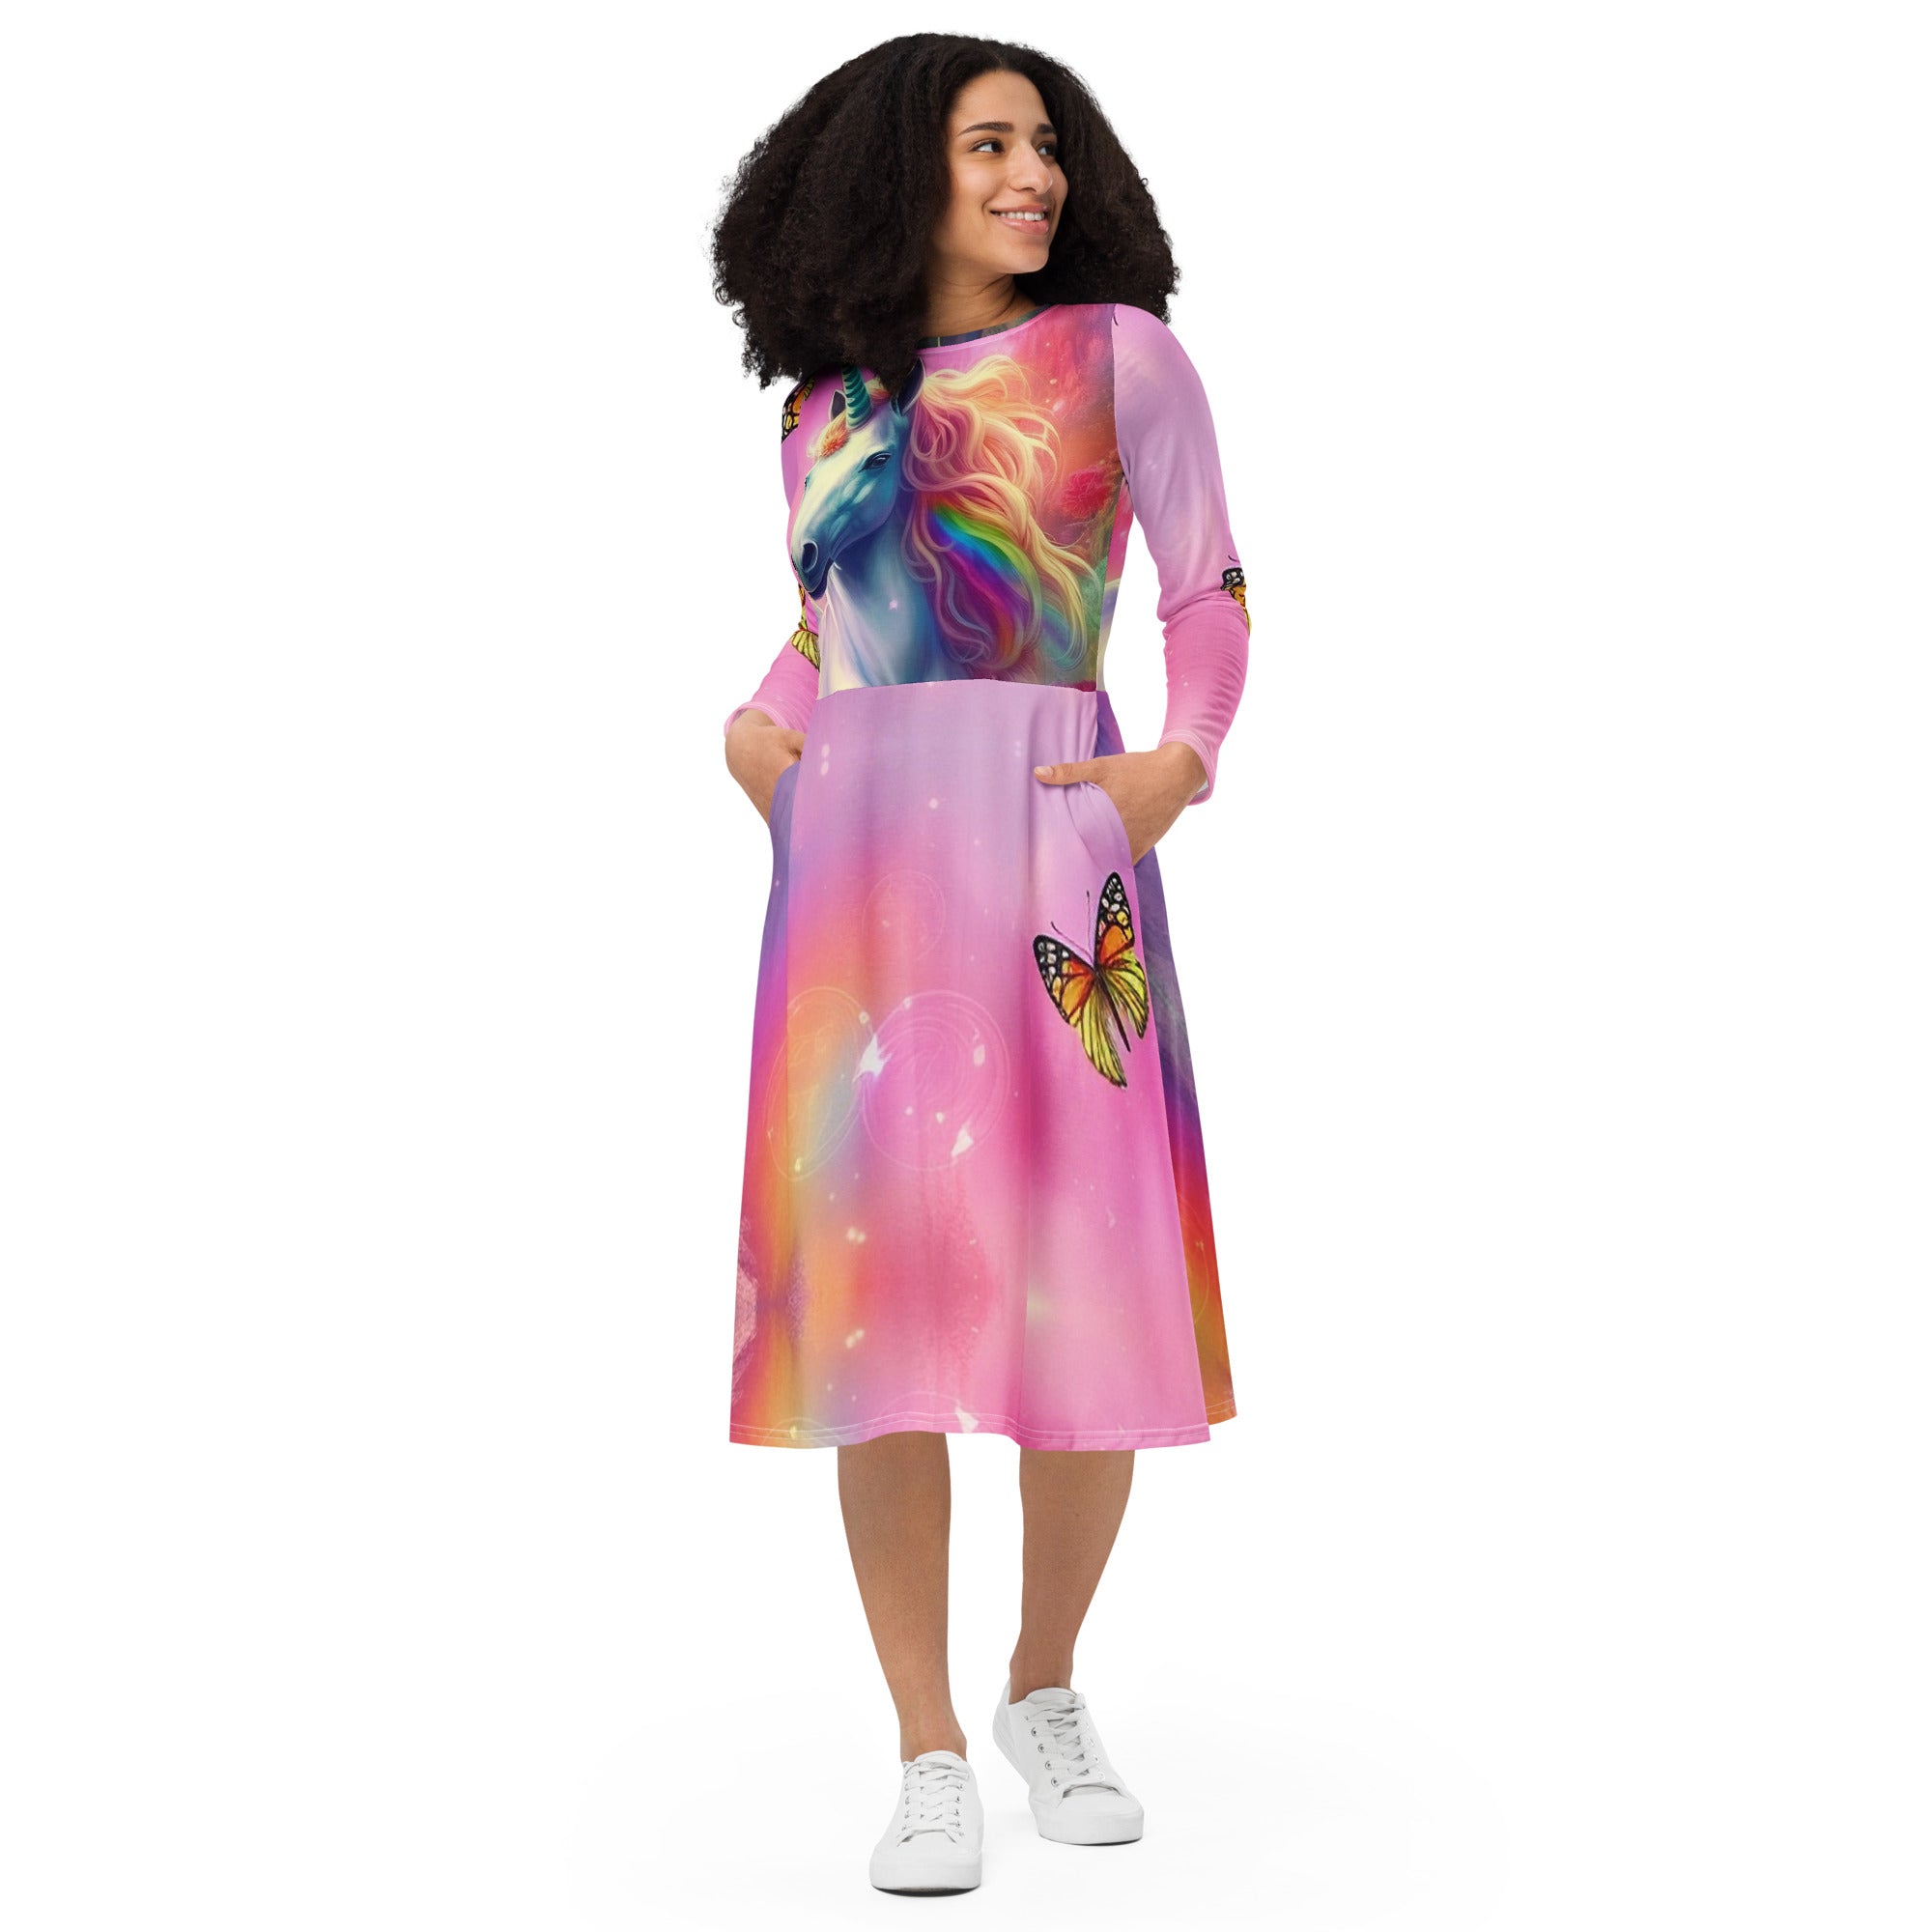 Captivate Hearts and Turn Heads: Radiate Elegance in our Unicorn and Butterflies Dress